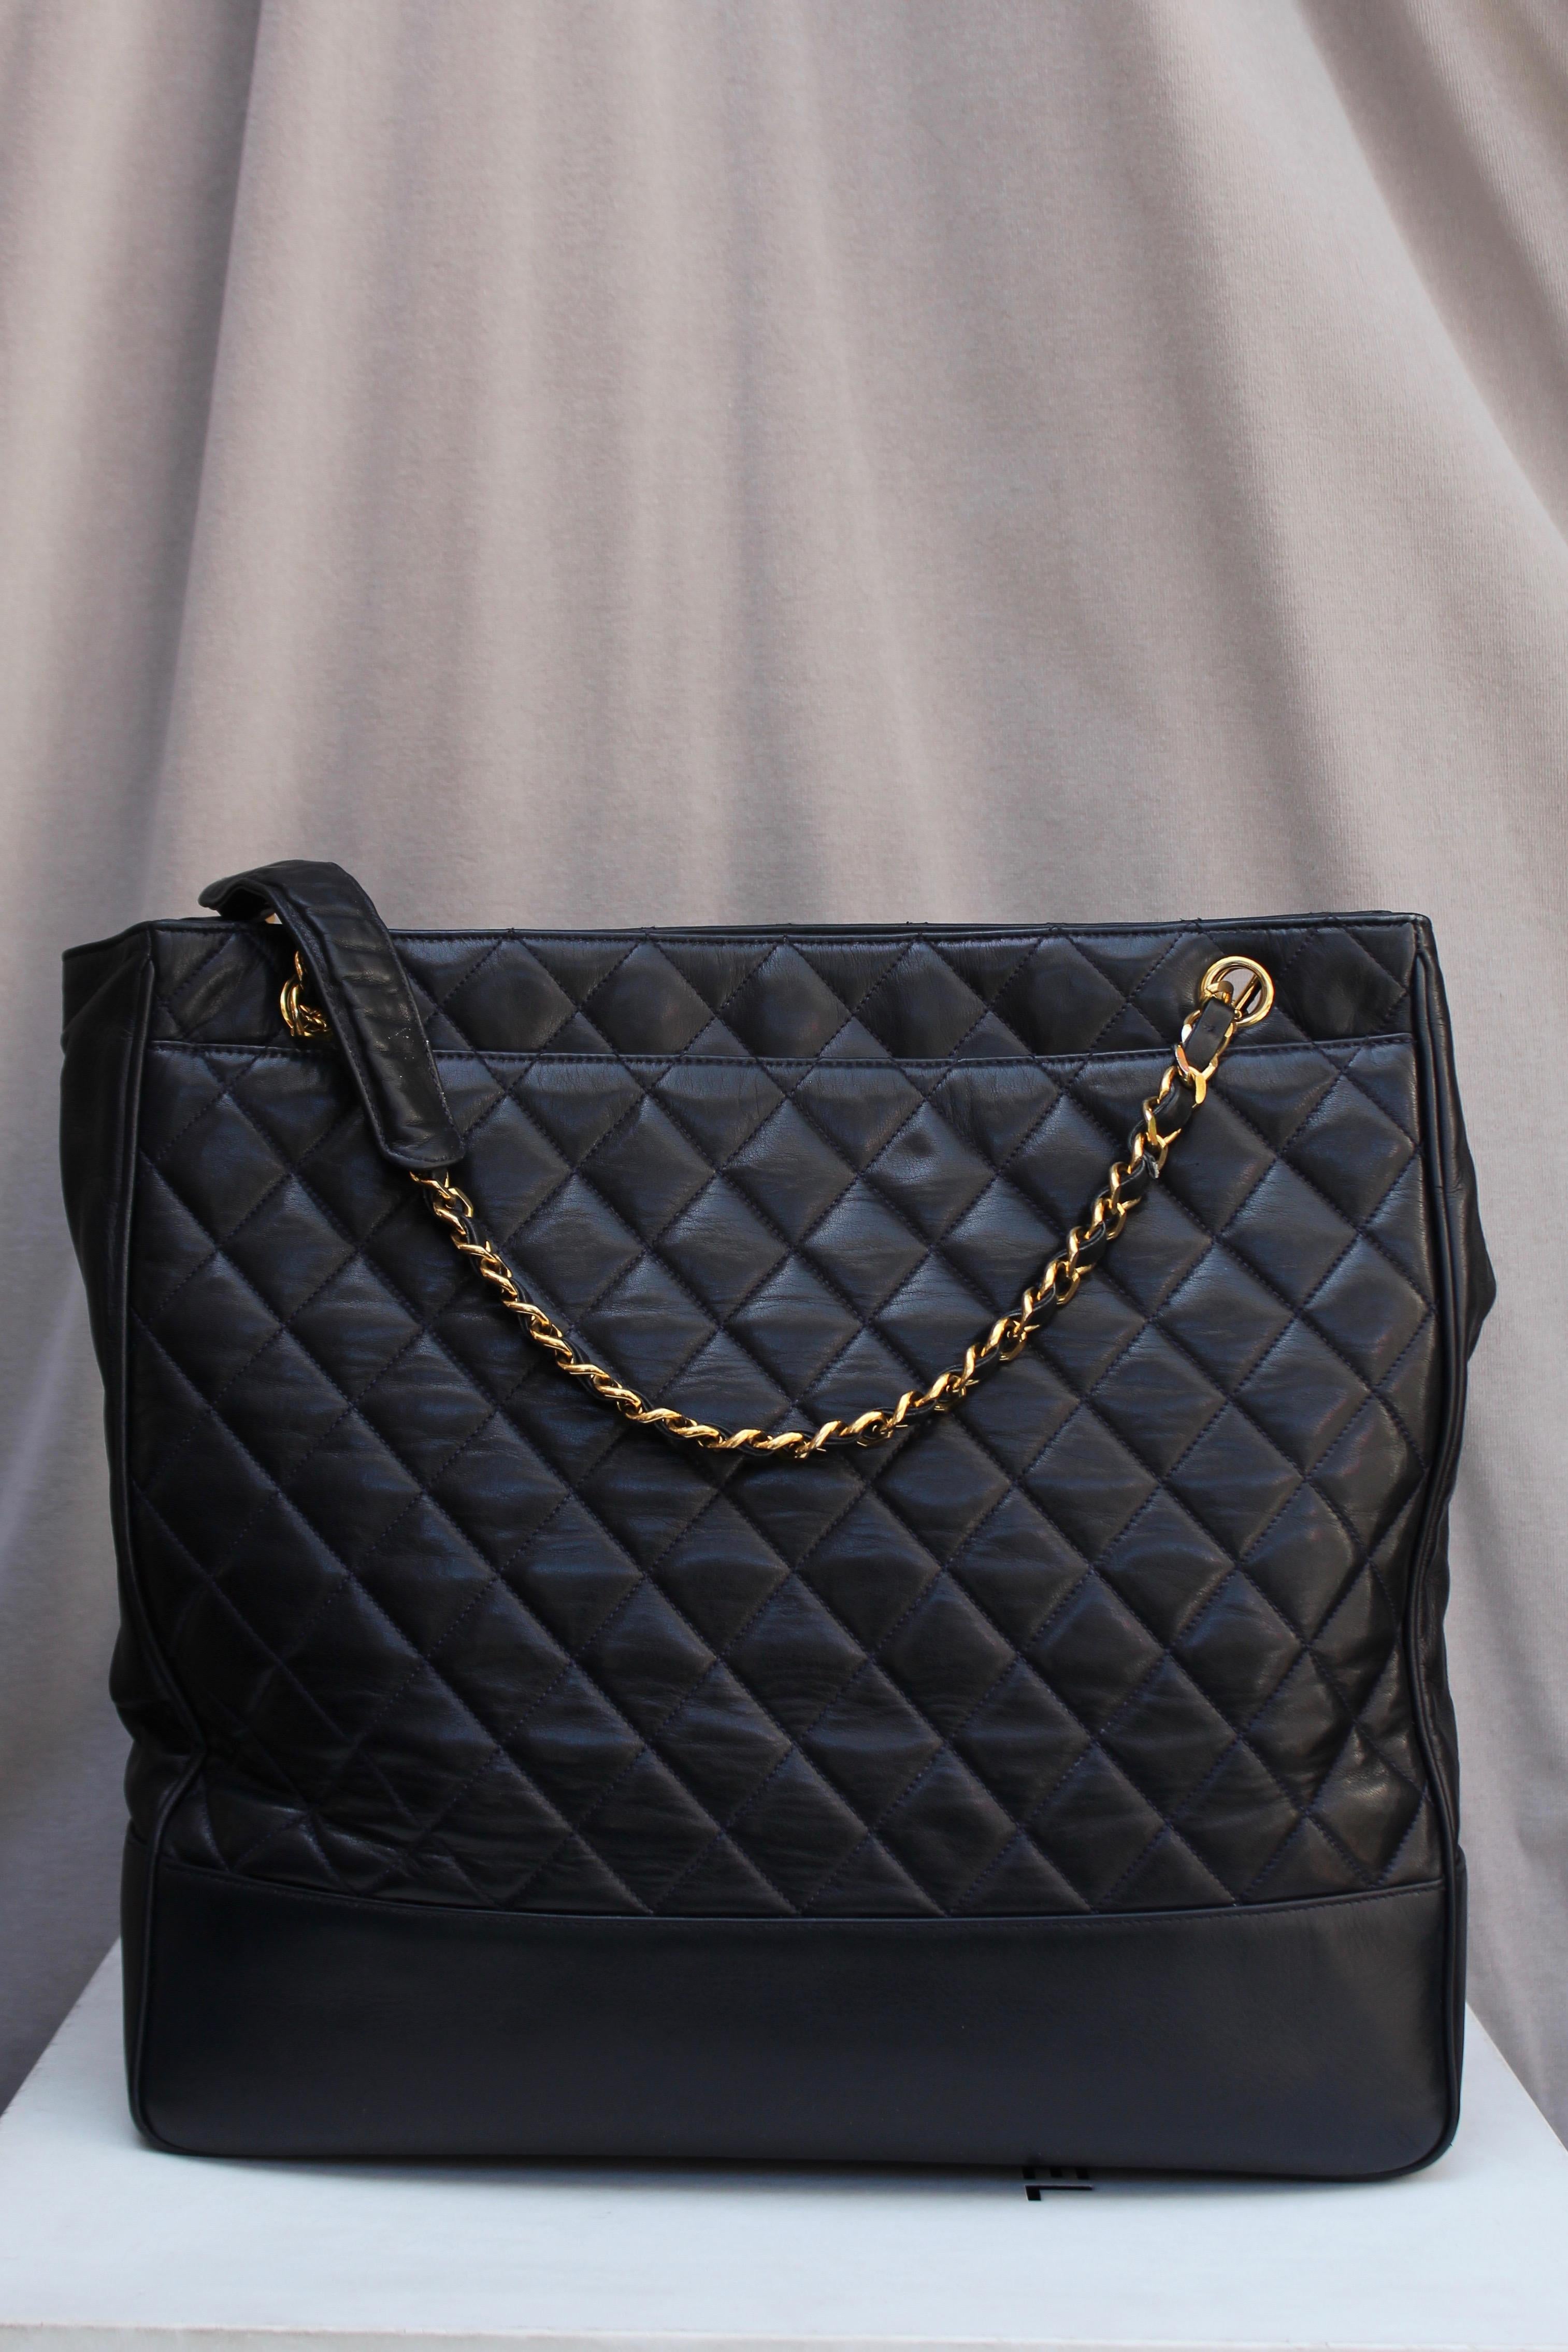 Women's Chanel large black quilted leather bag, 1990’s